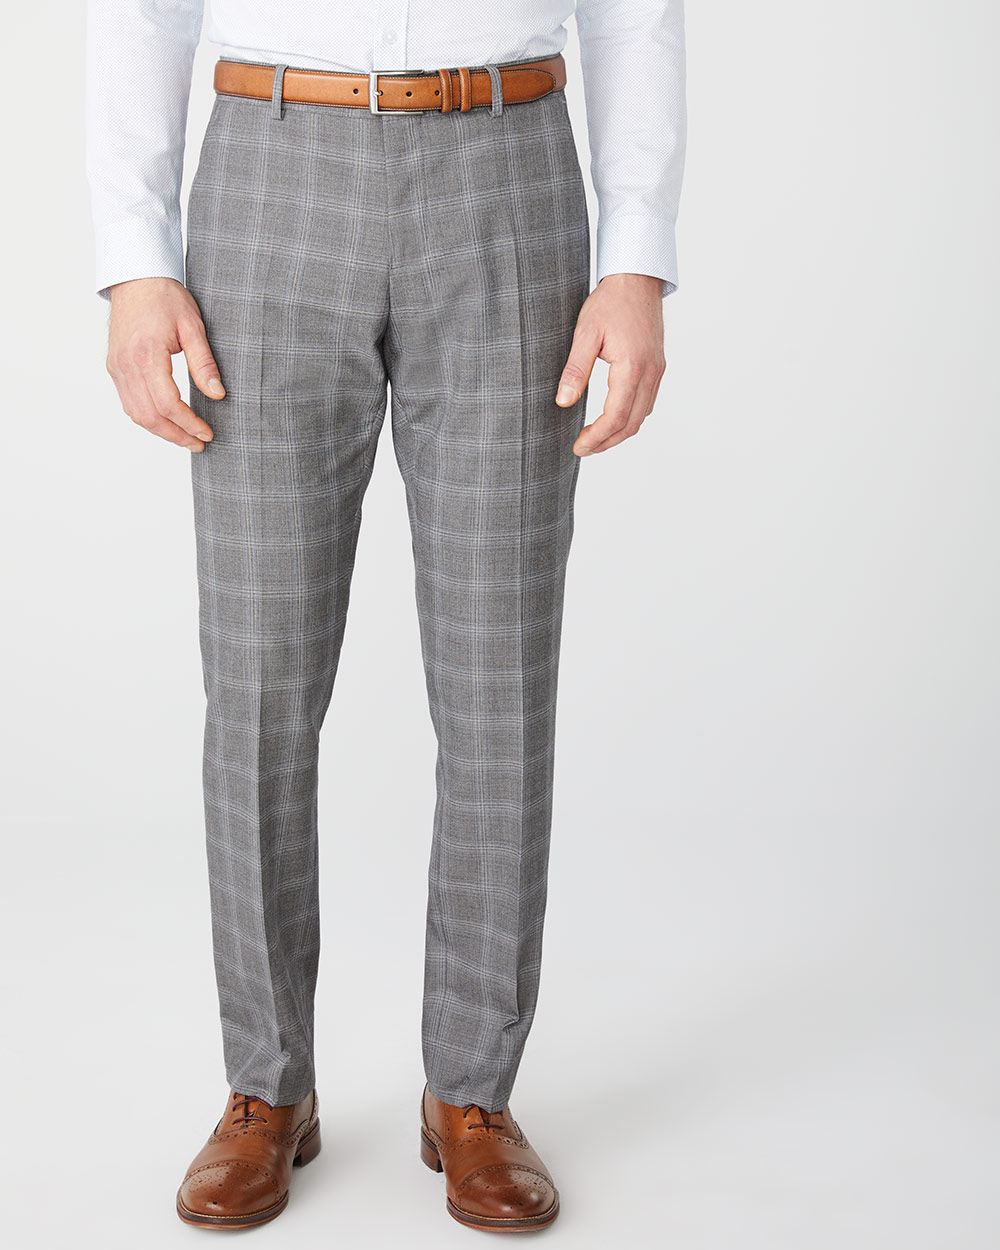 Tailored fit grey check suit pant | RW&CO.